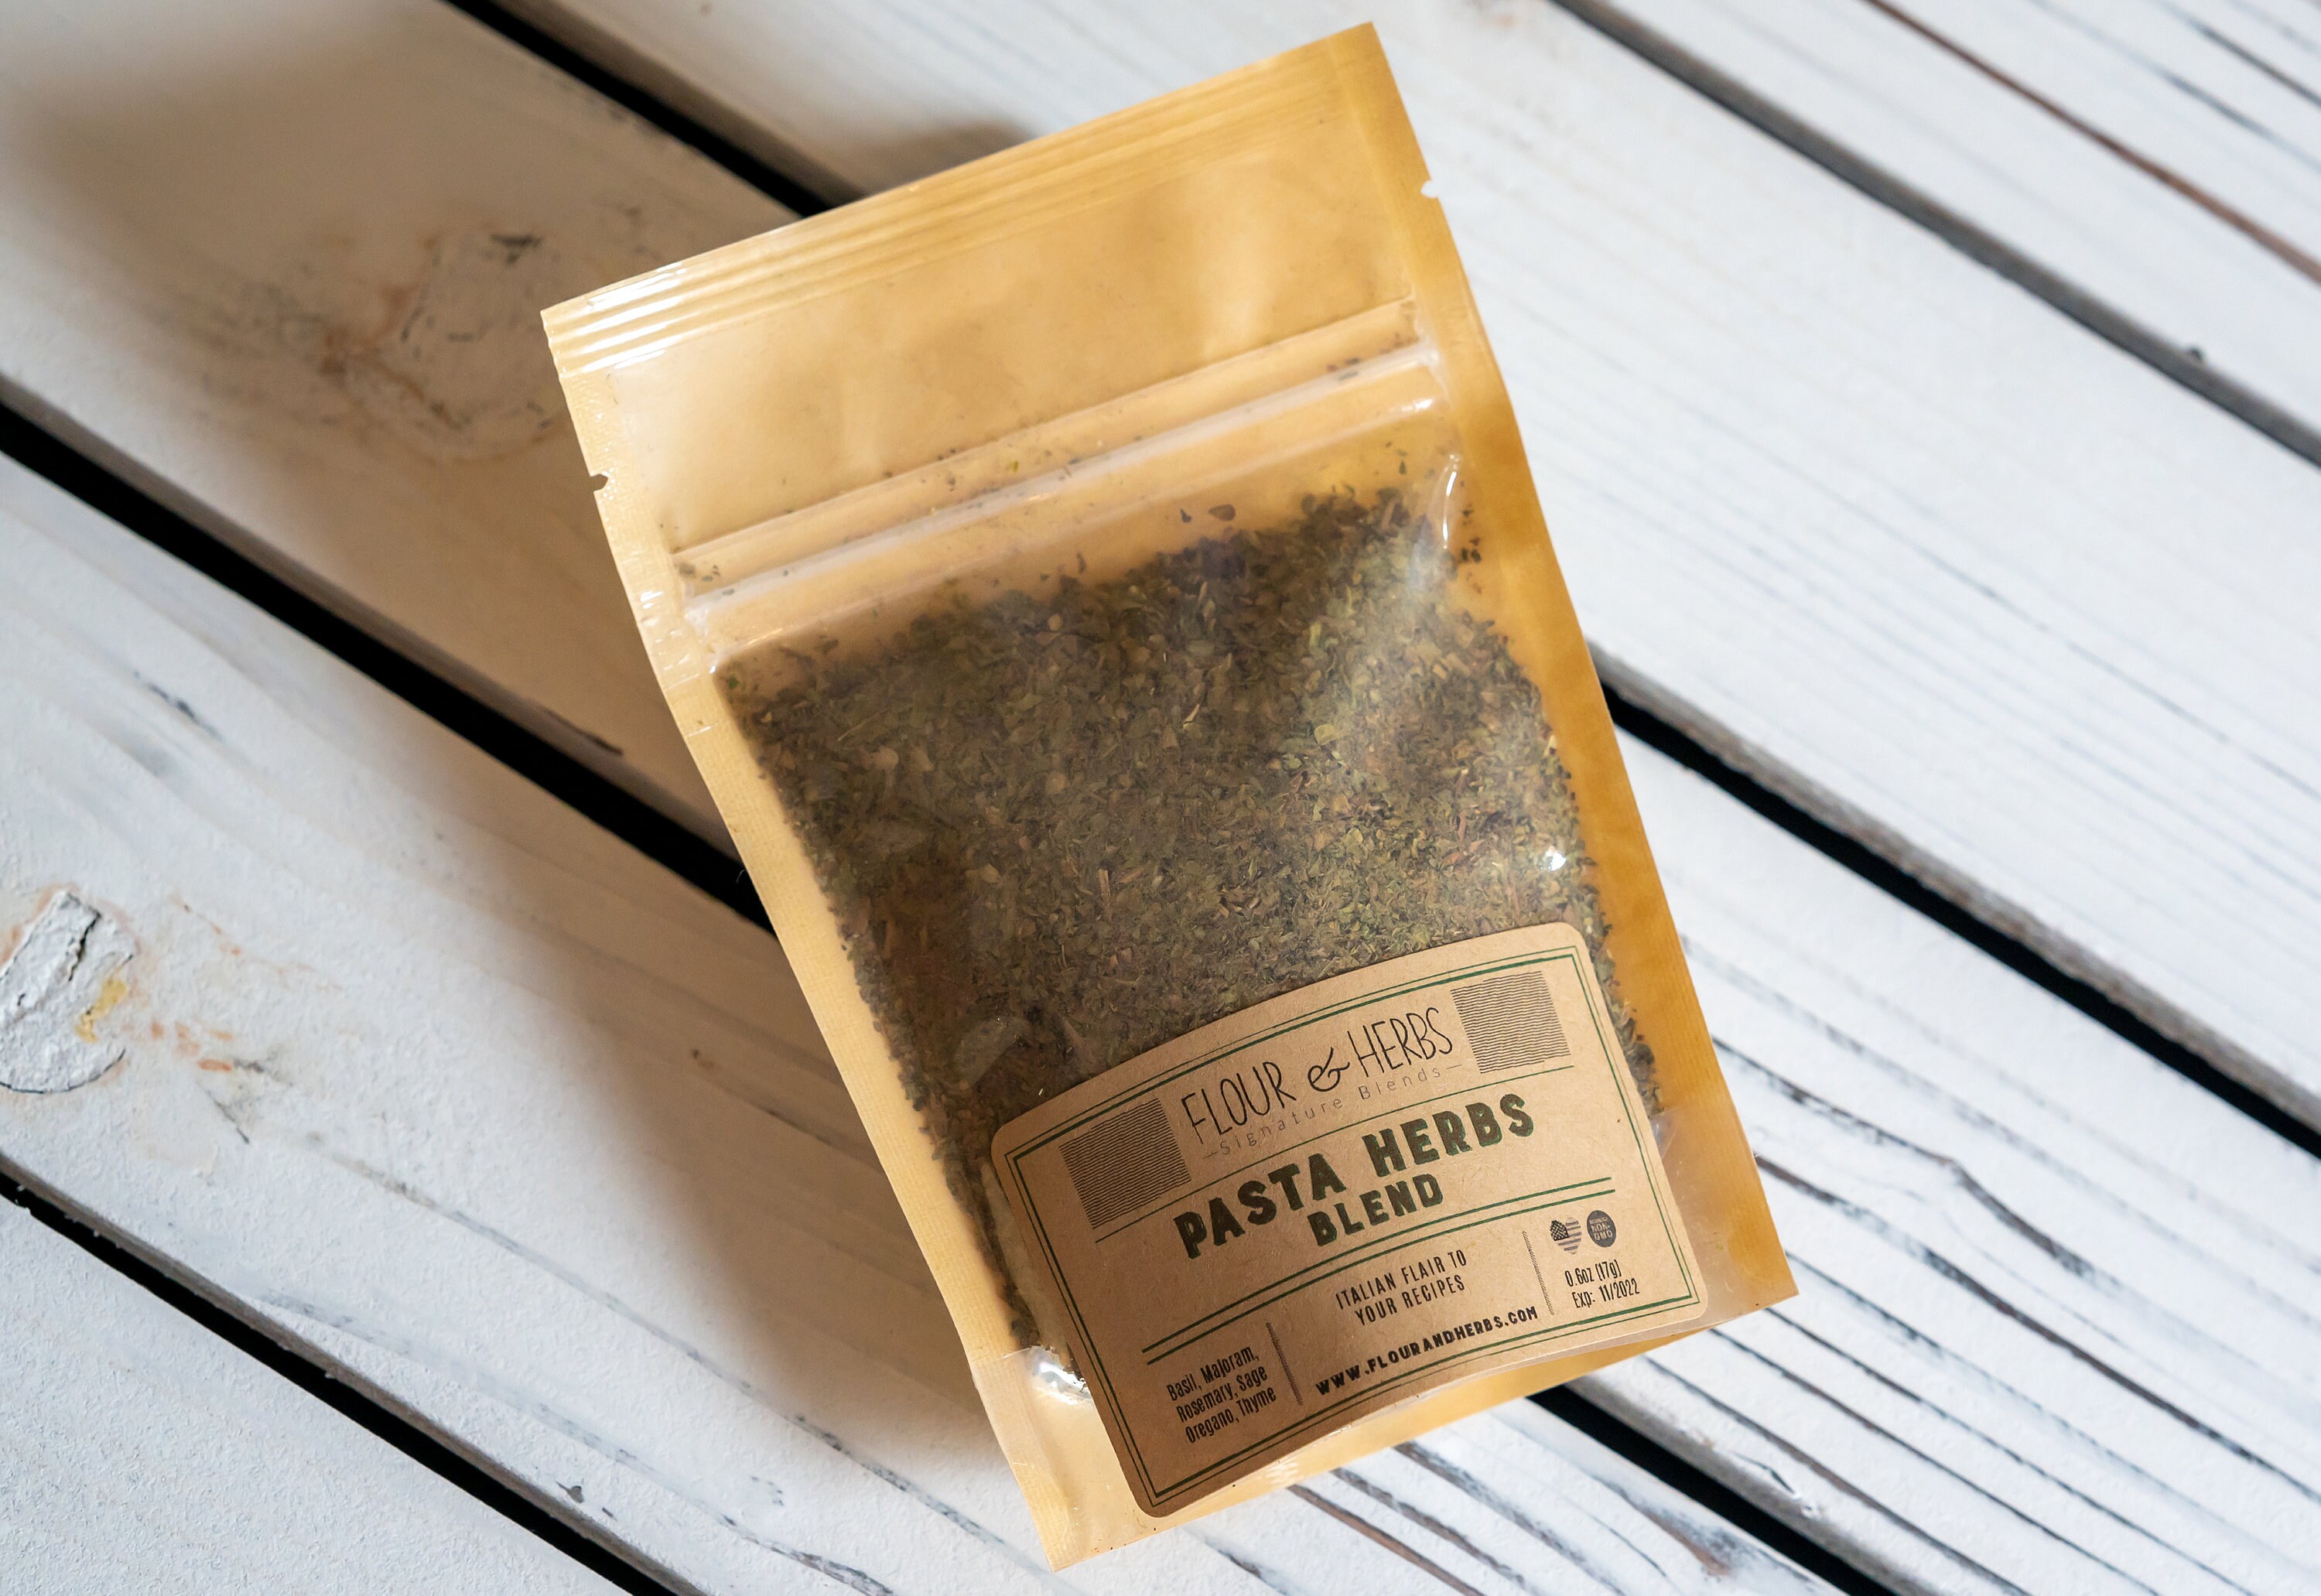 Pasta Herbs Blend, Dry Spice Pasta, Spice, Artisan Italian Herbs, Seasoning For Spices